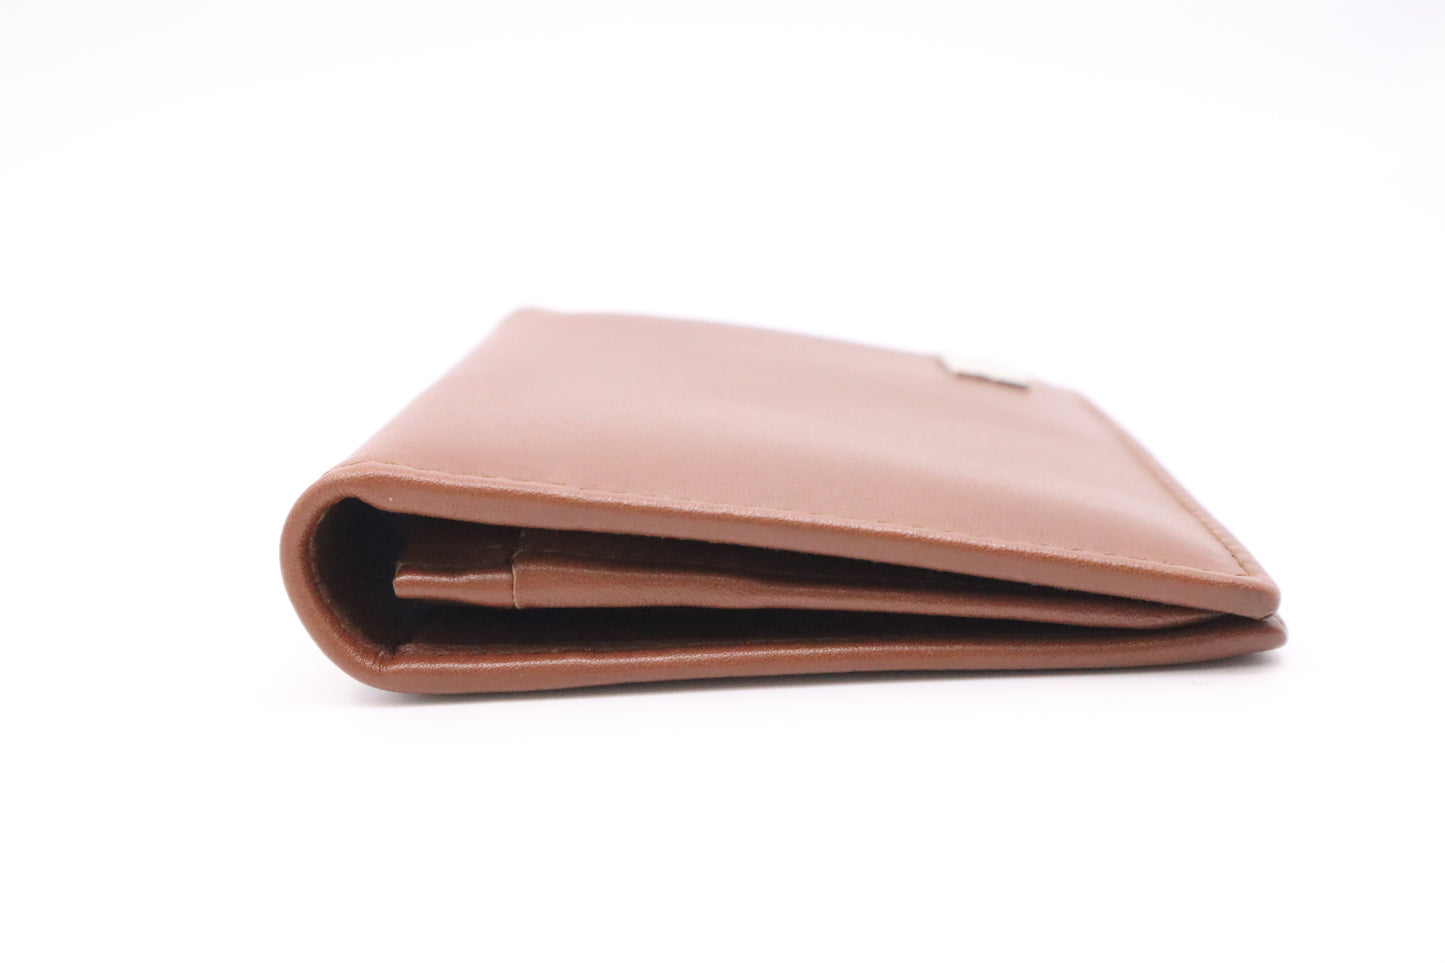 Gucci Bifold Wallet in Brown Leather